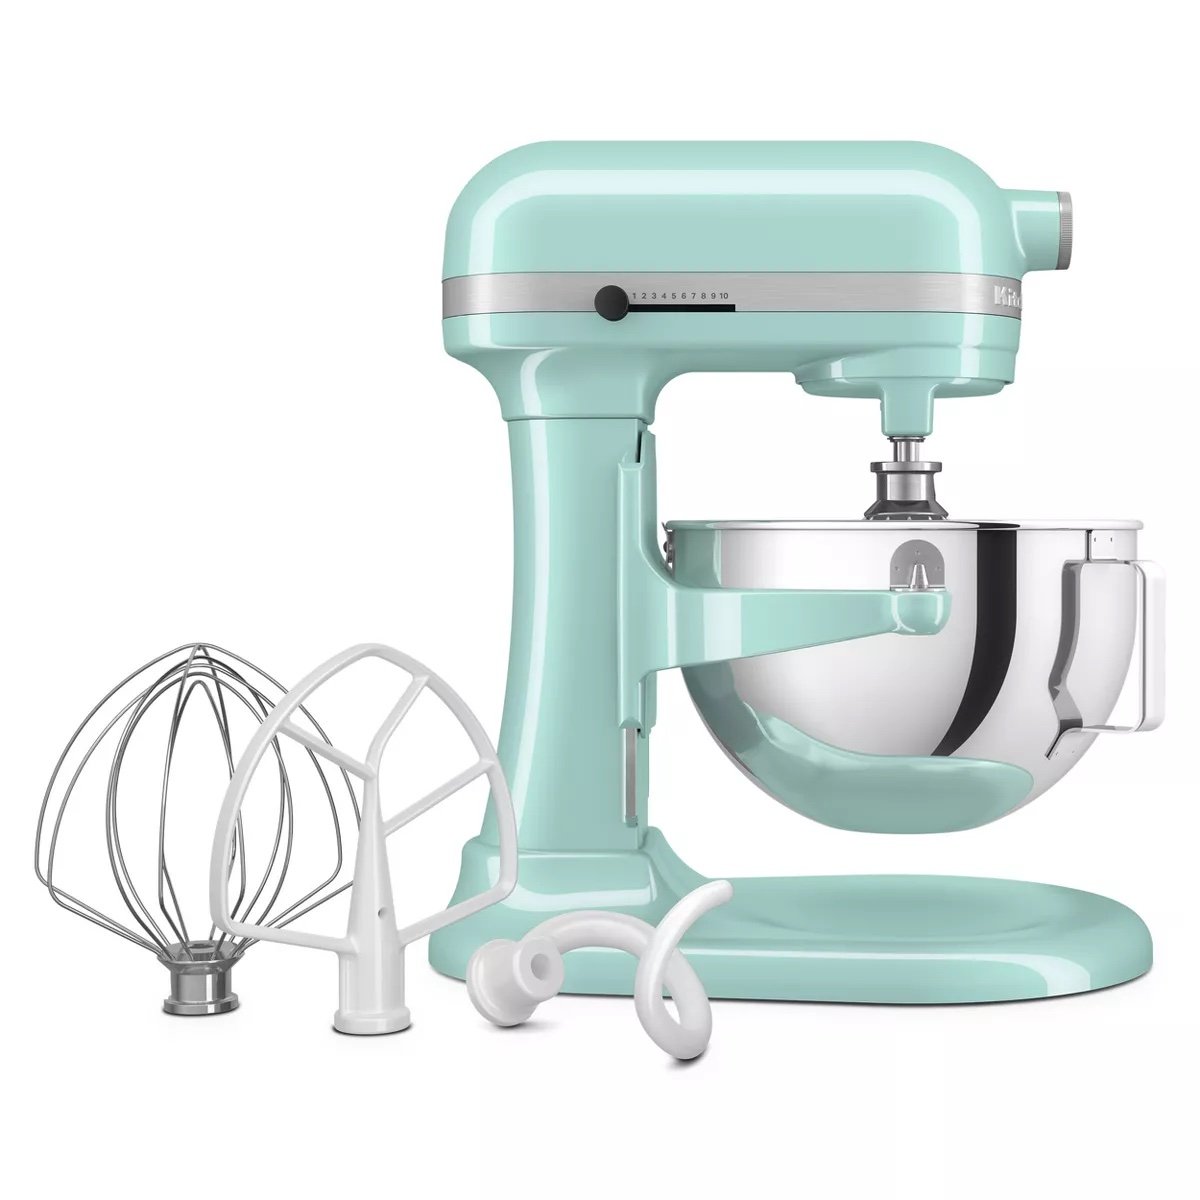 *Best price all year* Kitchenaid Mixer for $249.99